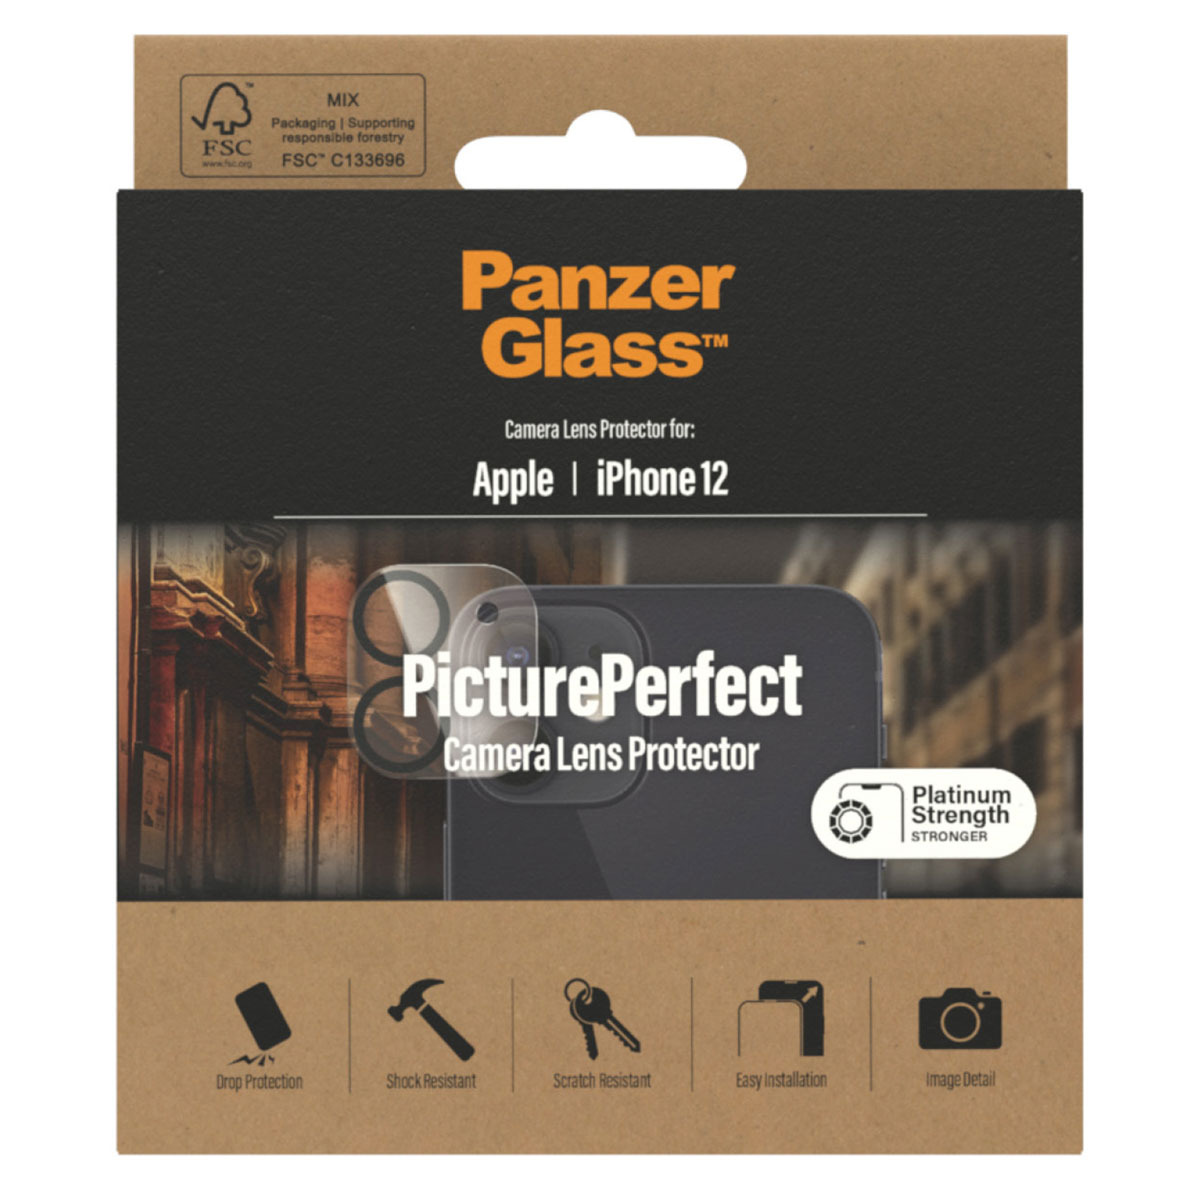 Panzerglass PicturePerfect Apple iPhone 12 Camera Lens Protector Glas